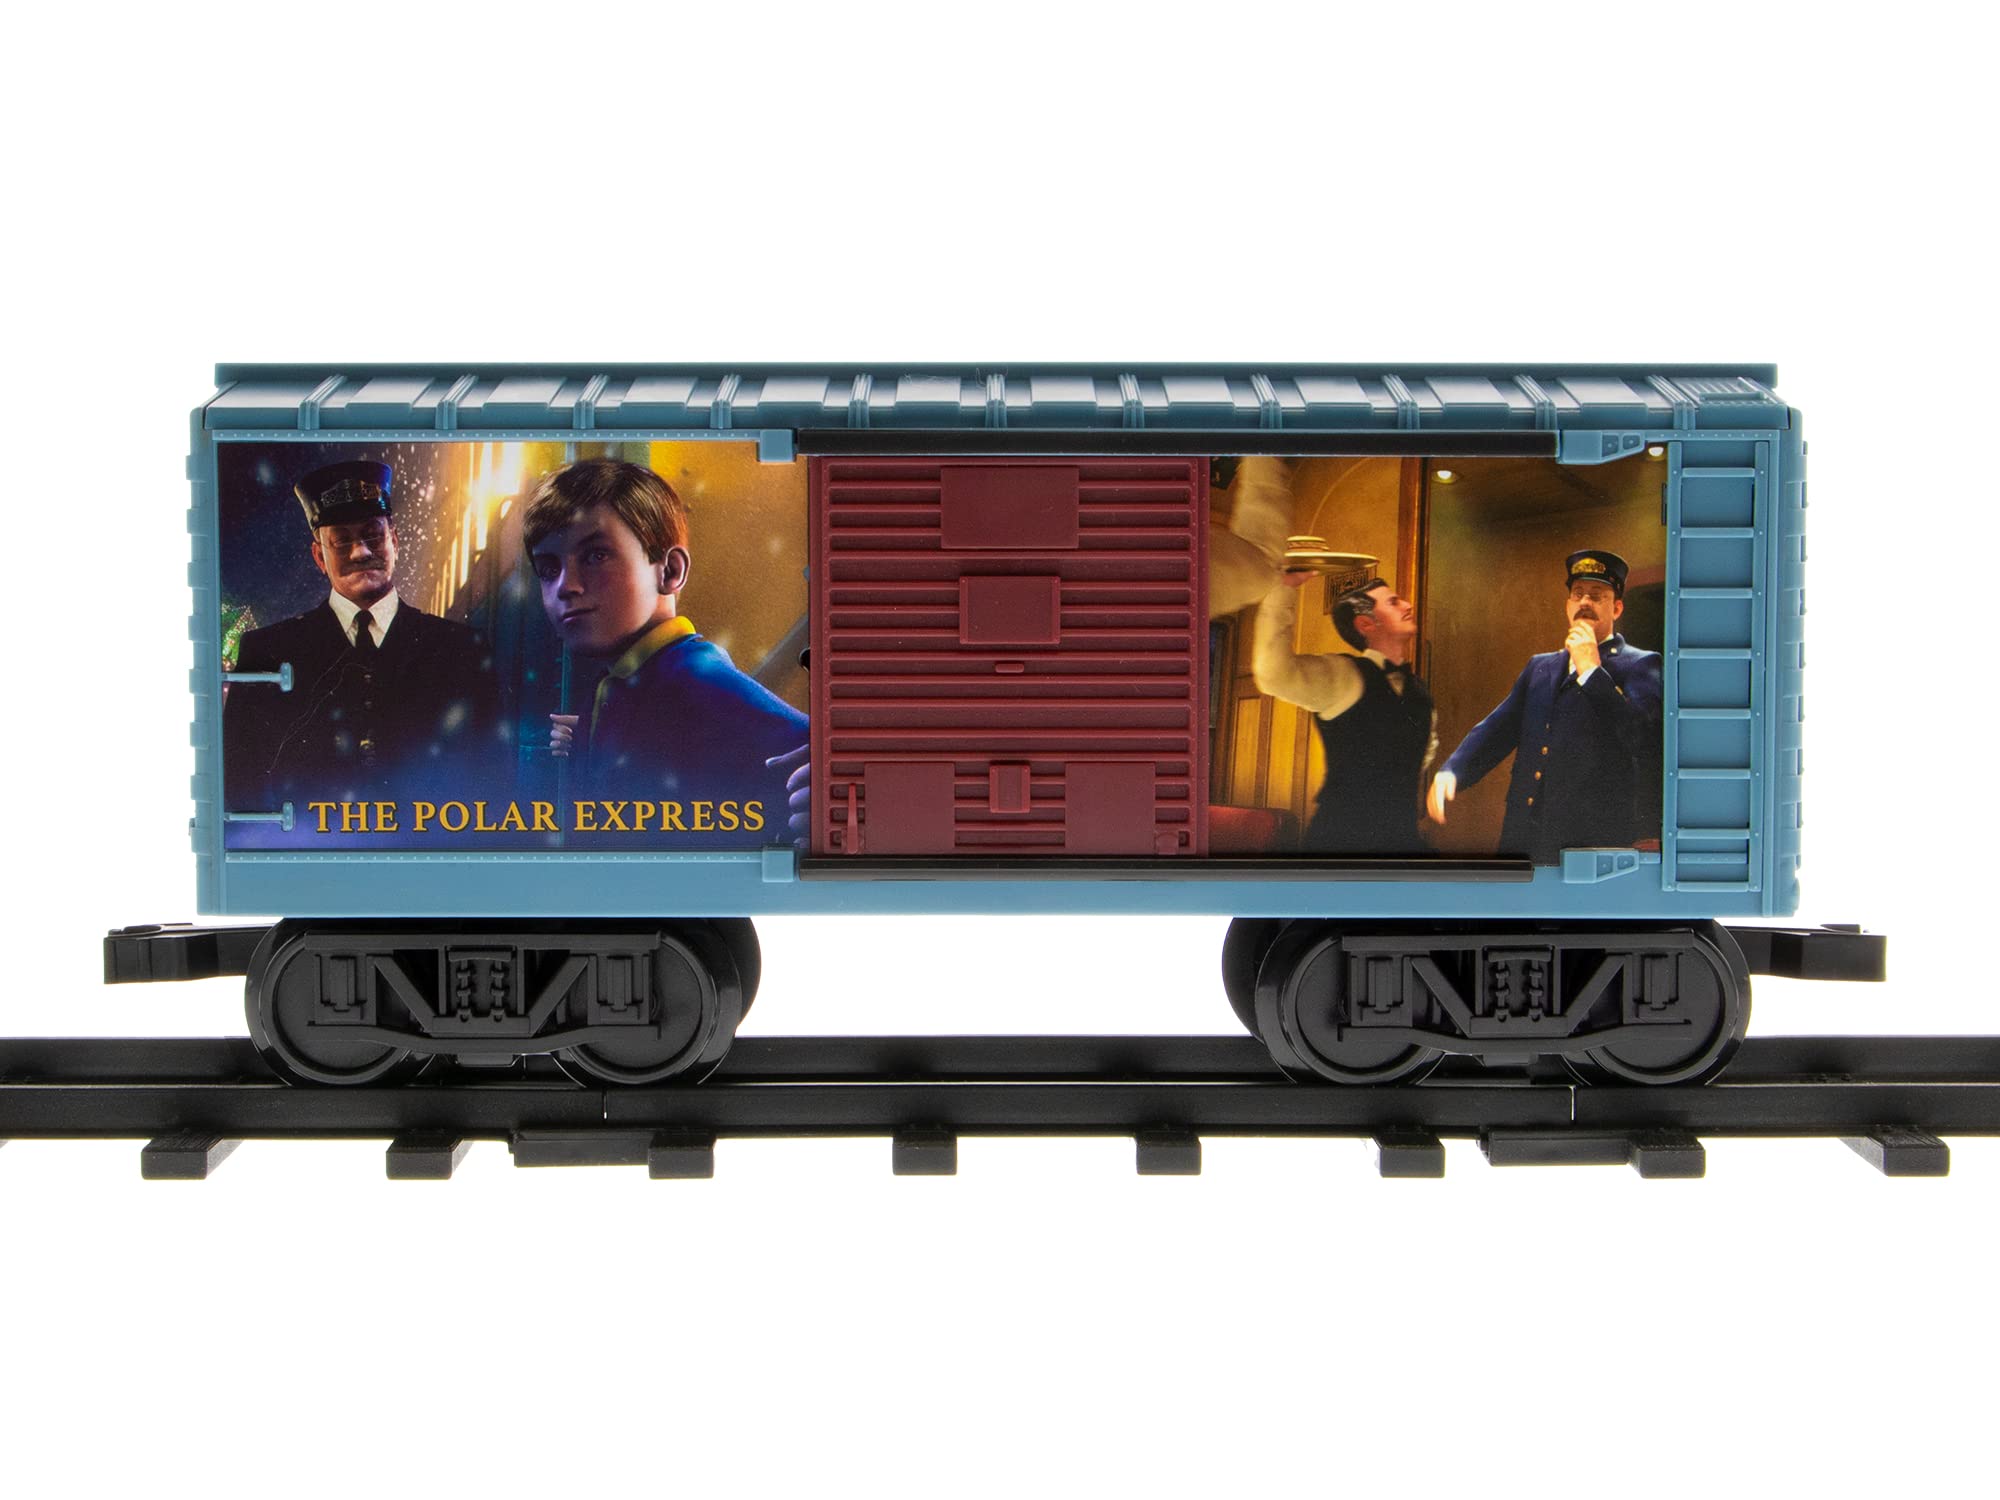 Lionel Polar Freight Ready-to-Play Battery Powered Model Train Set with Remote